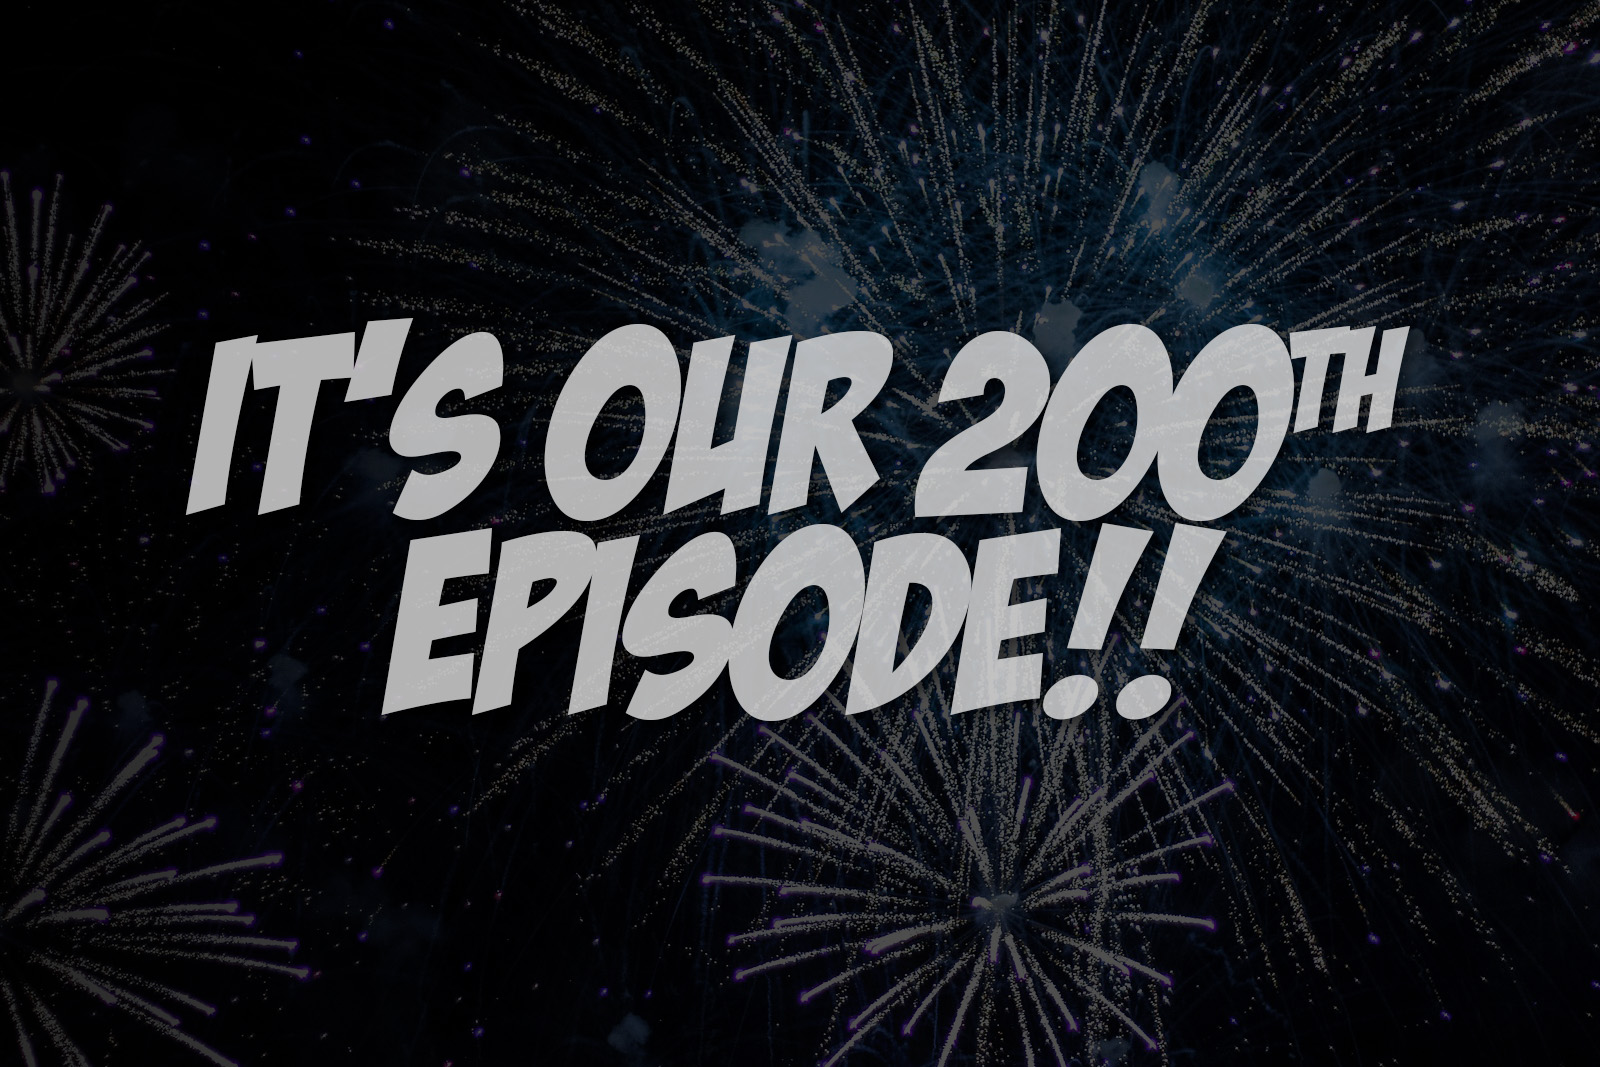 It’s Our 200th Episode!